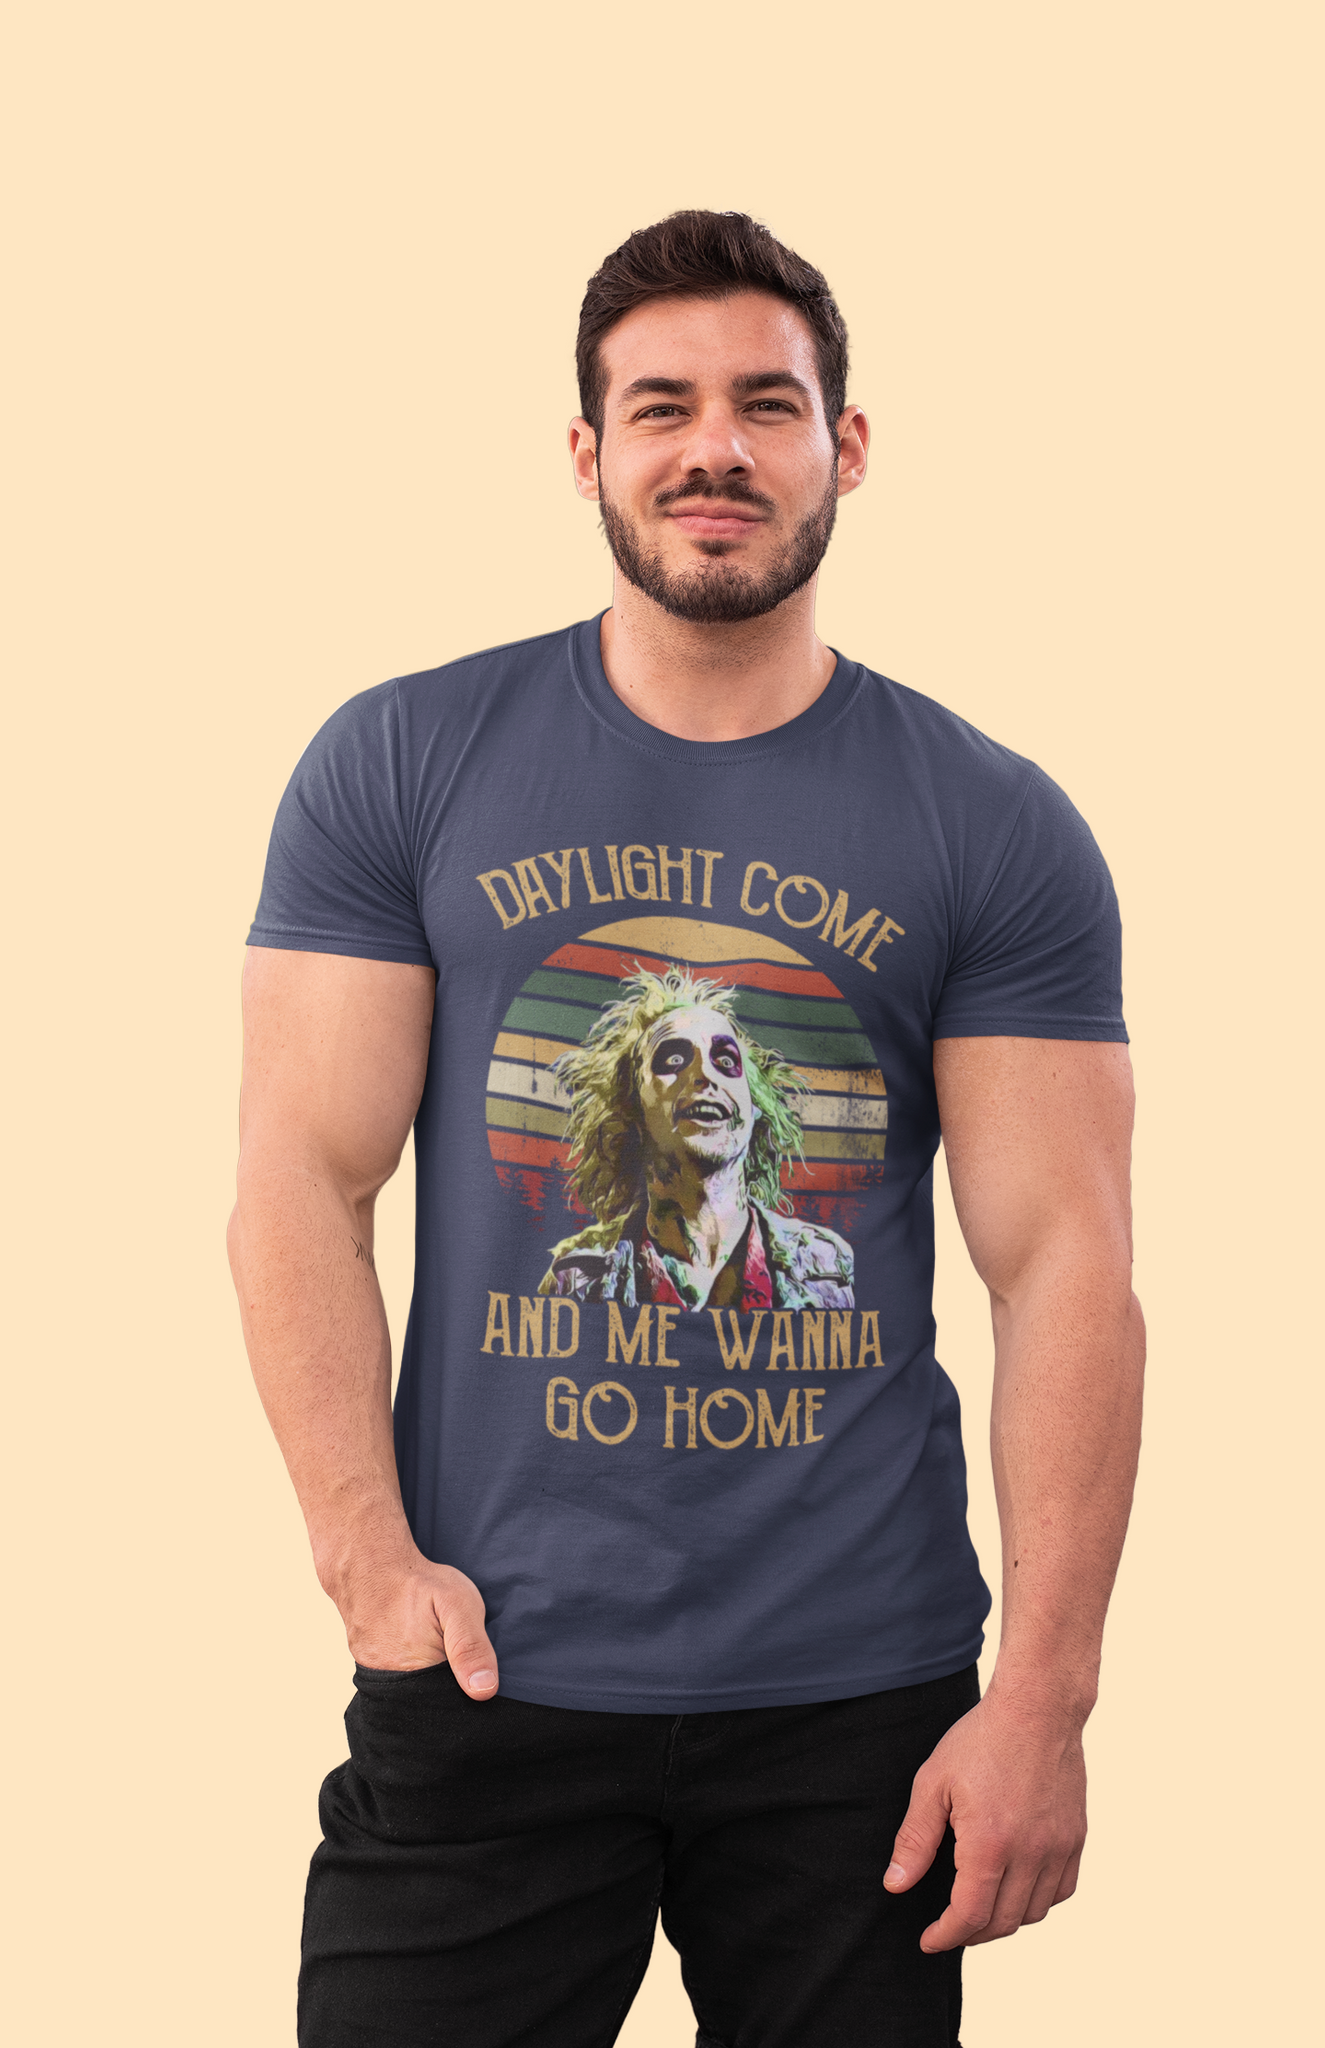 Beetlejuice Vintage T Shirt, Daylight Come And Me Wanna Go Home Shirt, Halloween Gifts